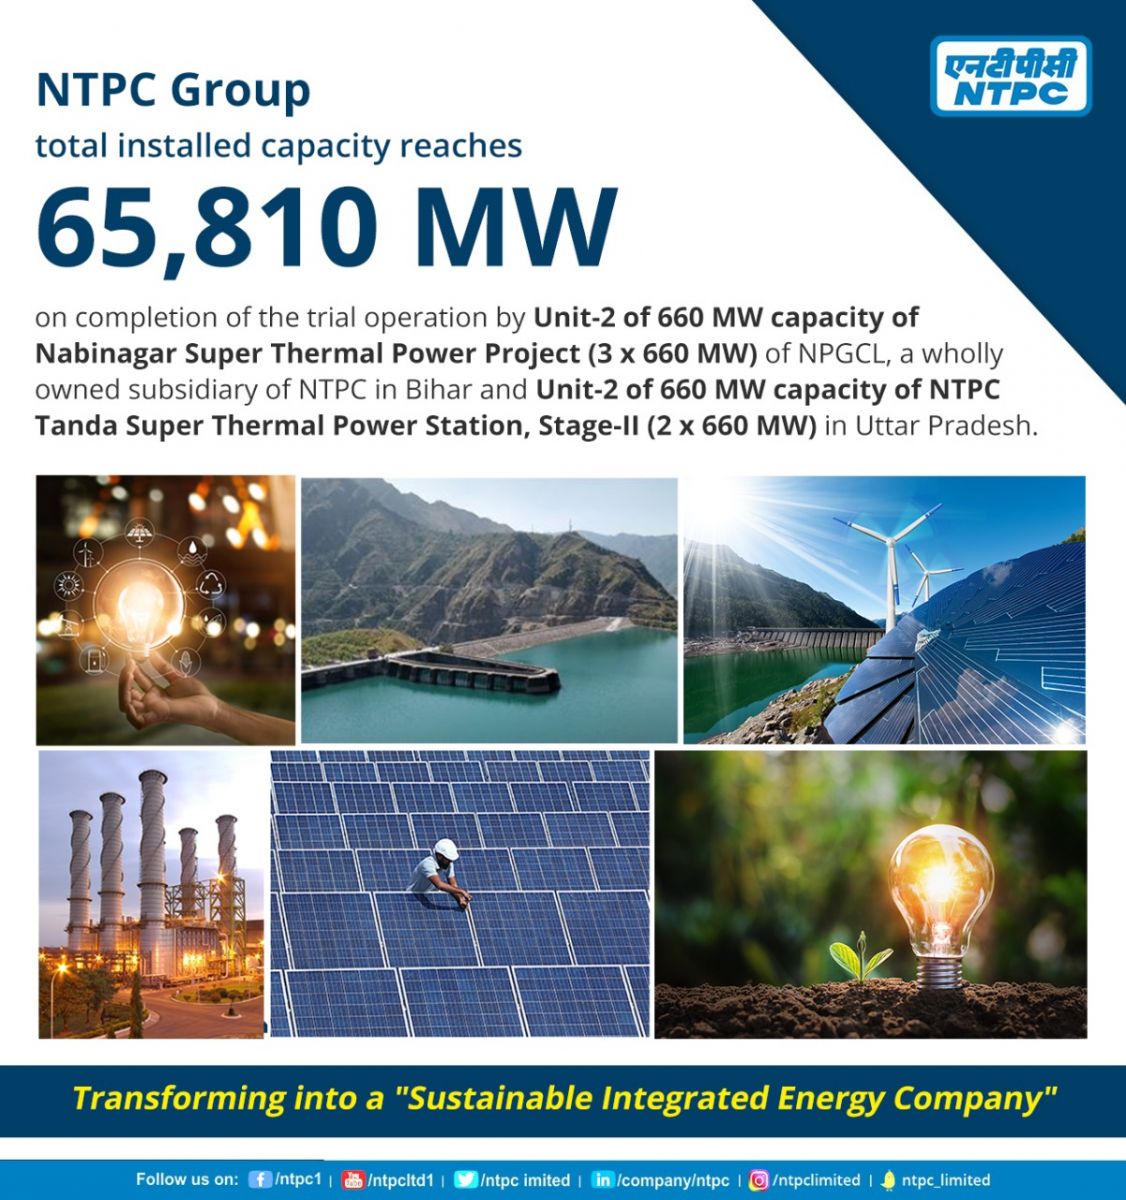 NTPC Group total installed capacity reaches 65,810 MW